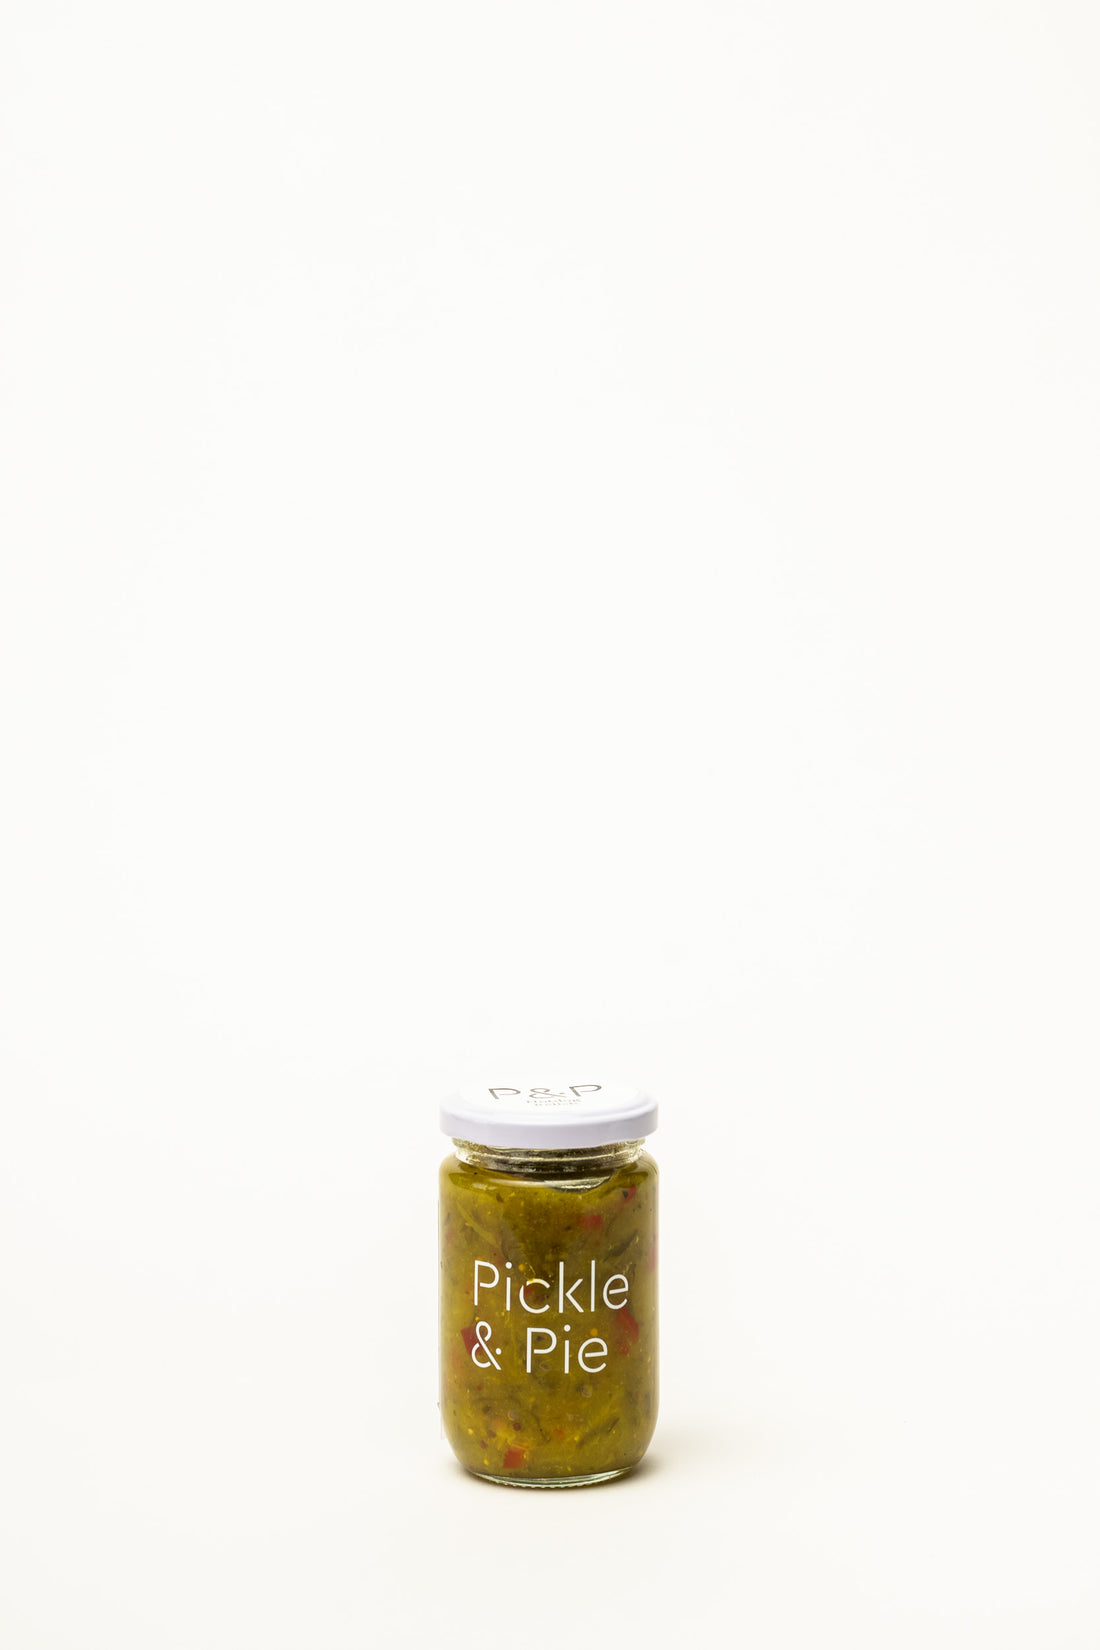 Hot Dog Relish - Pickle & Pie